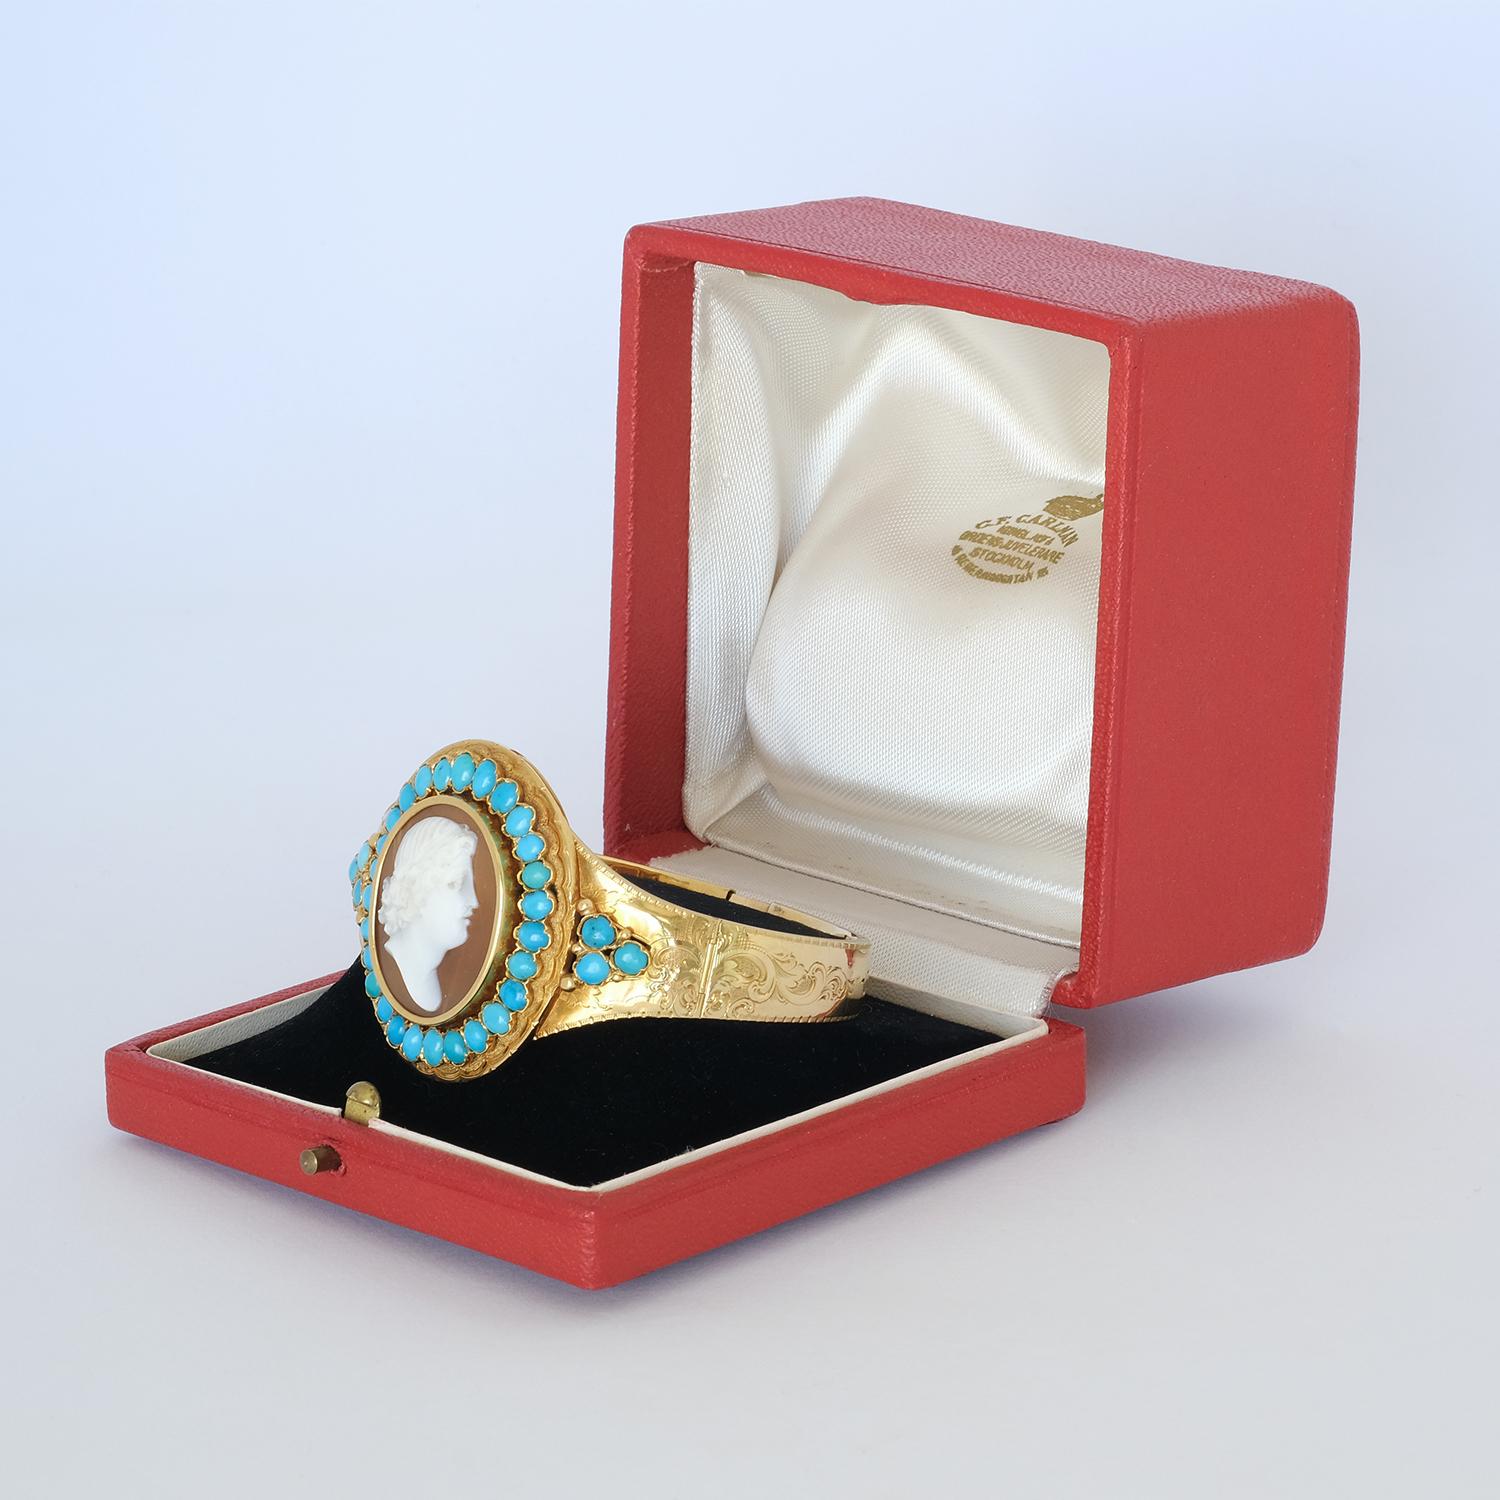 This 18 karat gold bangle has a beautiful cameo made out of shell and around the cameo there are 33 cabochon cut turquoises. The gold bangle itself is adorned with classic rocaille engravings.

This bangle fits the classic summer-dress as well as